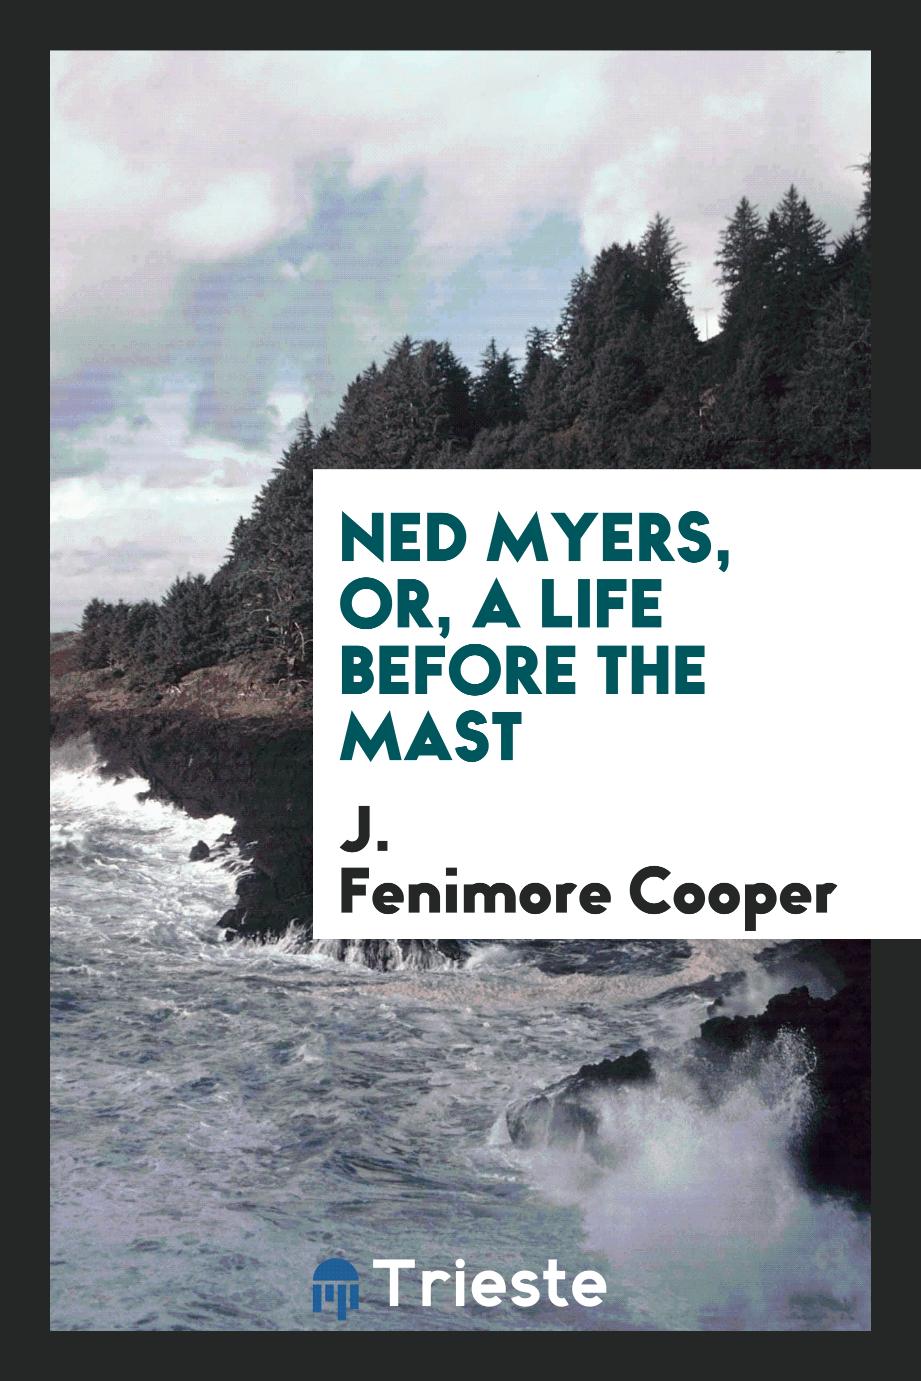 Ned Myers, or, A life before the mast - J. Fenimore Cooper